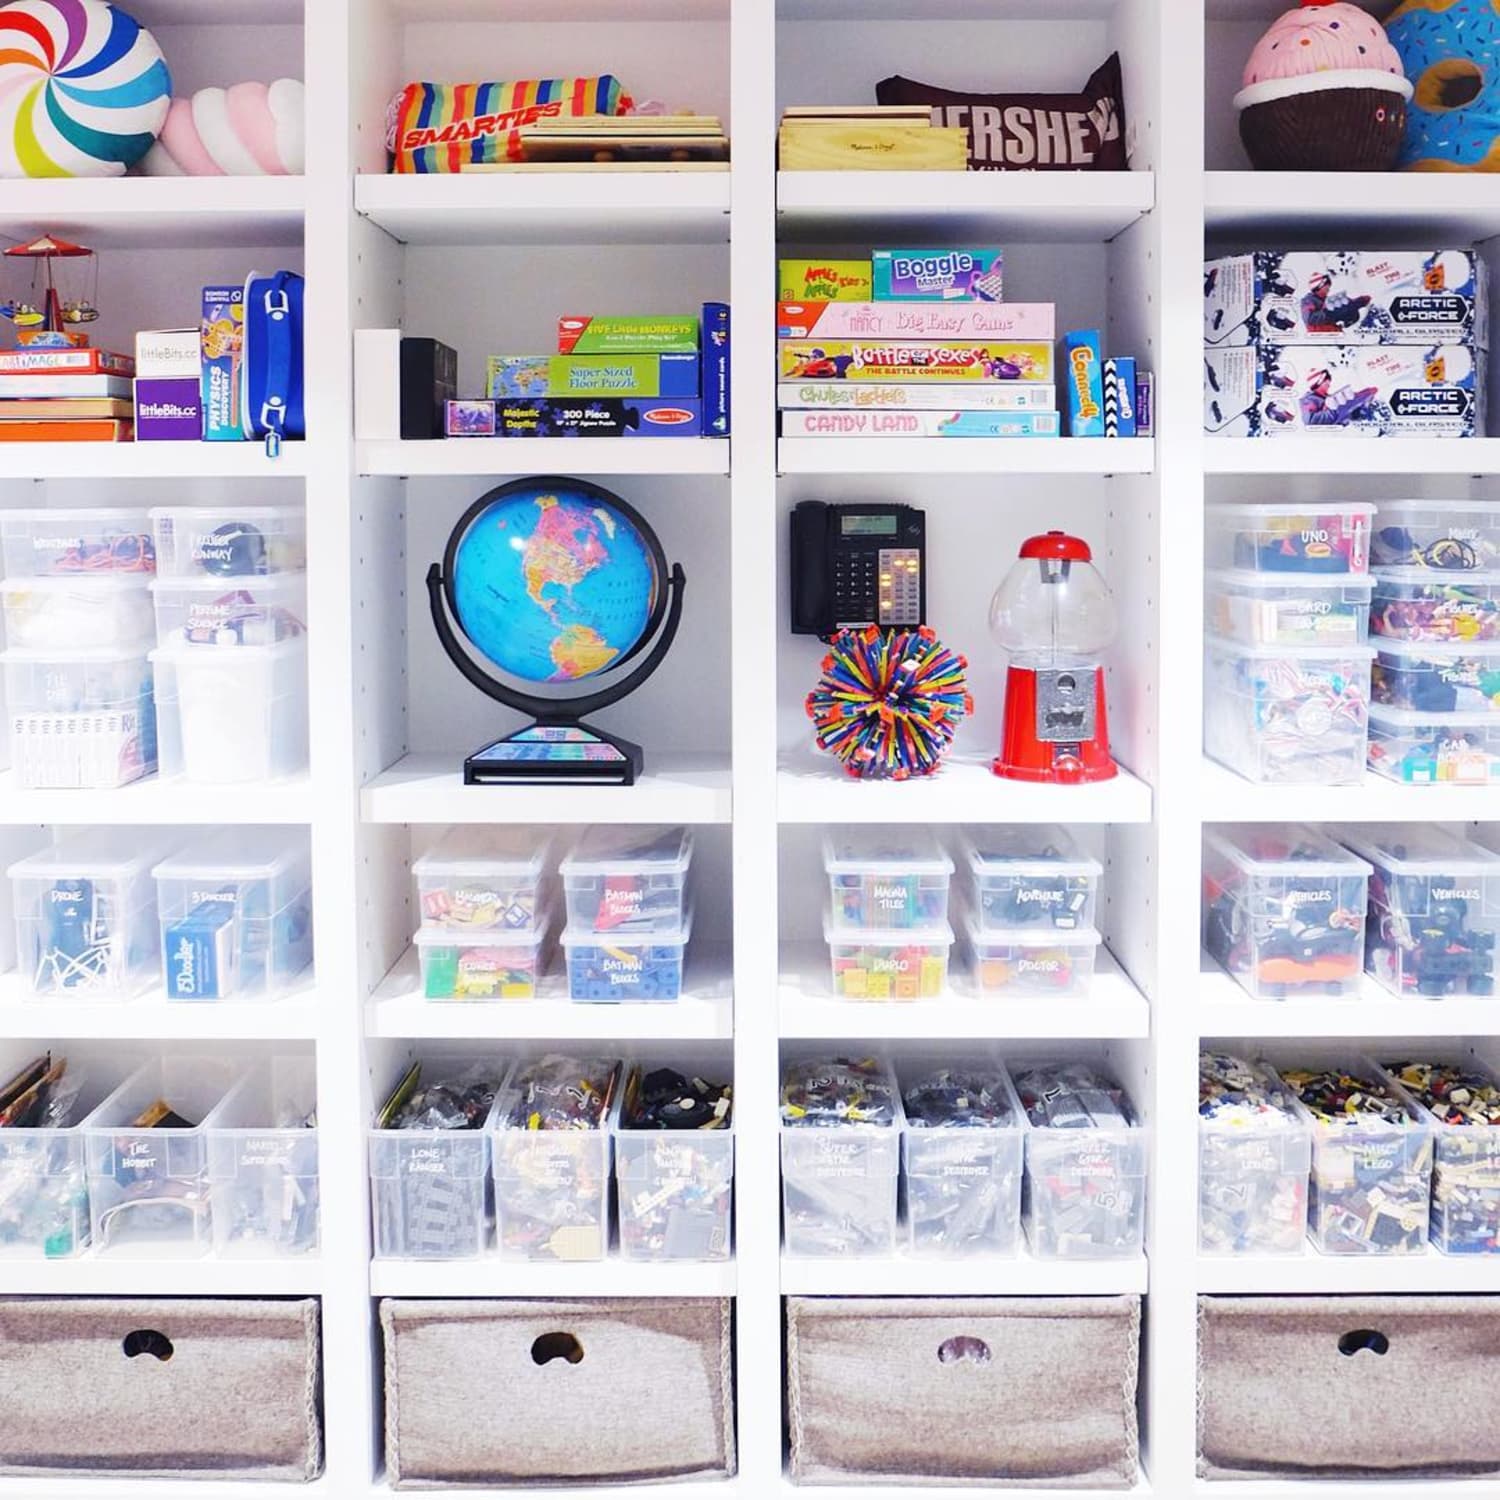 Your Organized Gameplan for Successfully Sharing a Closet